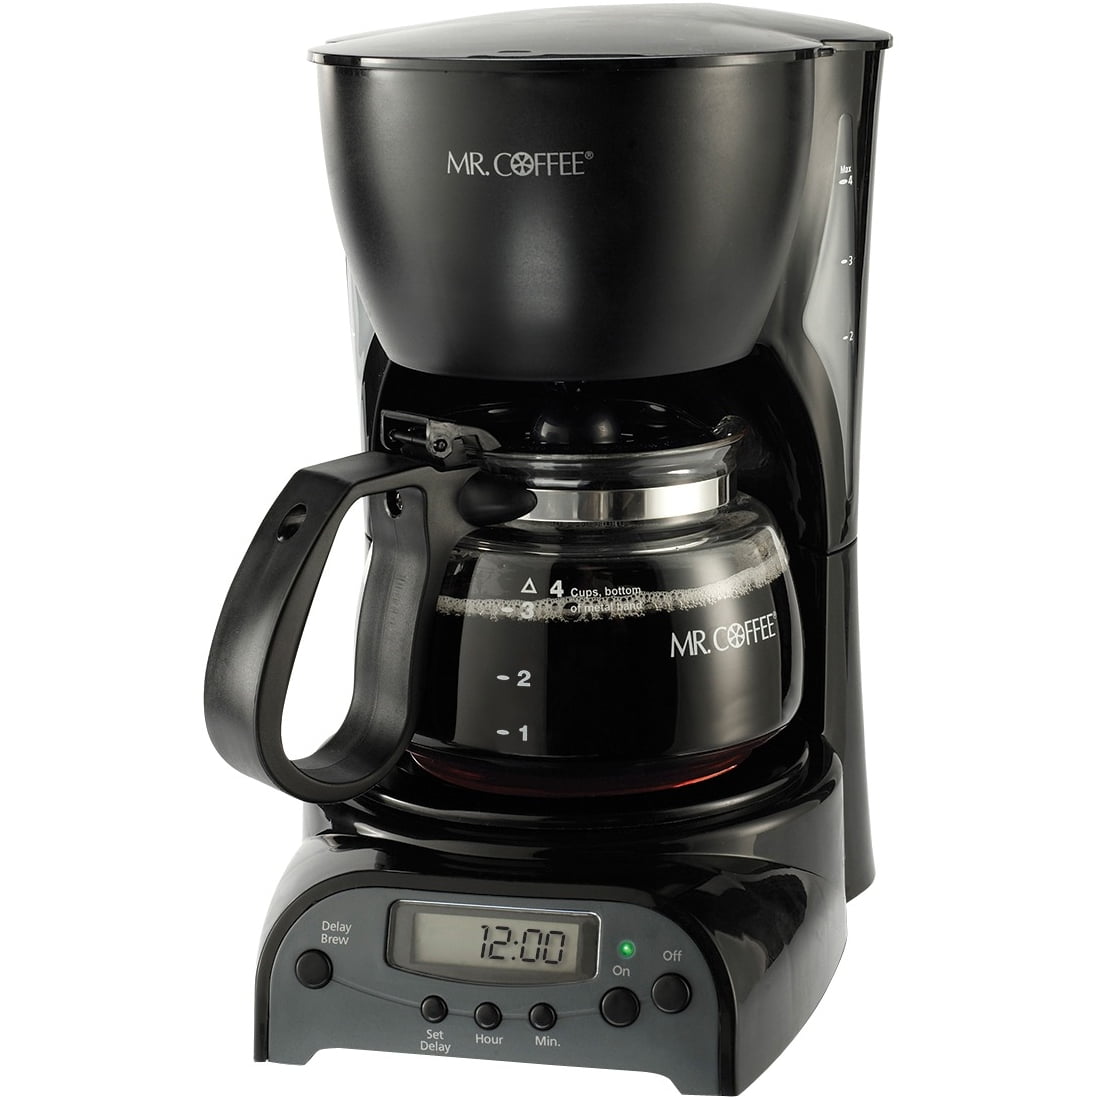 Mr. Coffee 4-Cup Switch Coffee Maker, Black (DR5-NP)